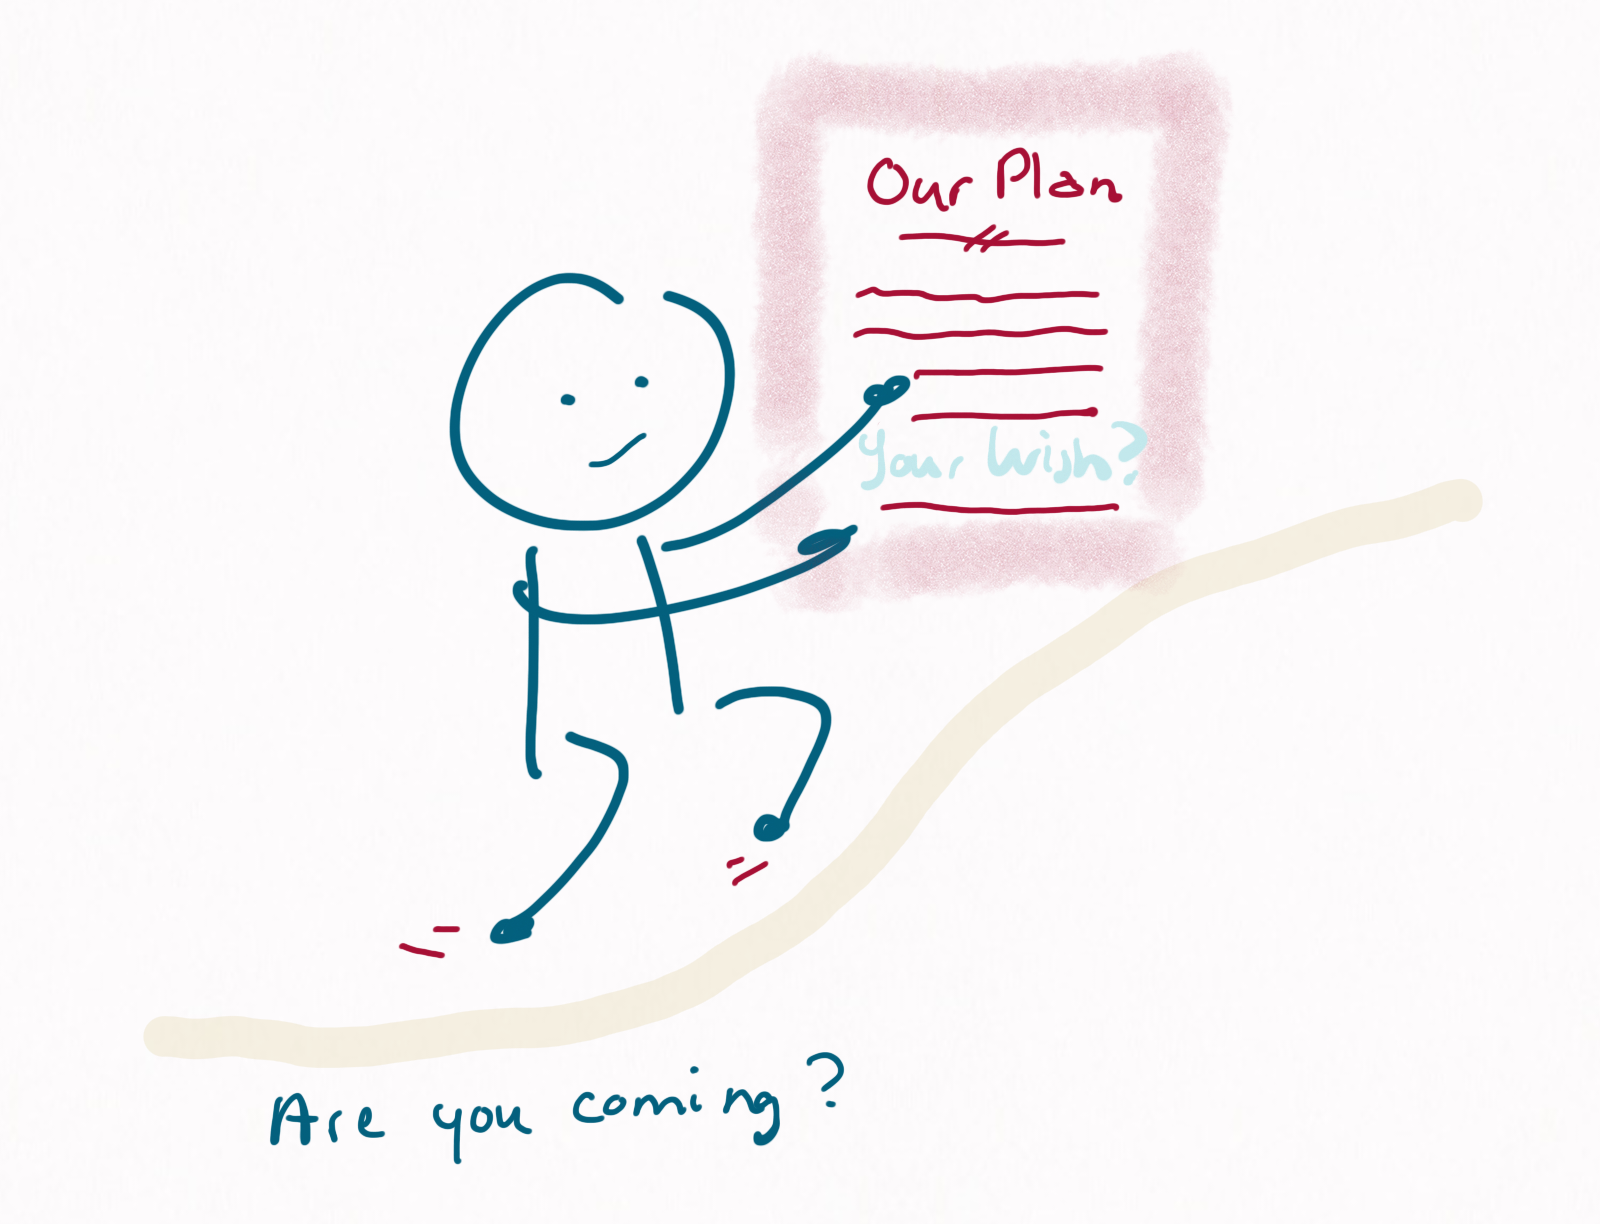 We see a person walking up a low hill, pointing happily at a big notice board that says: "Our plan" at the top and "Your wish?" at the bottom. The caption reads "Are you coming?"